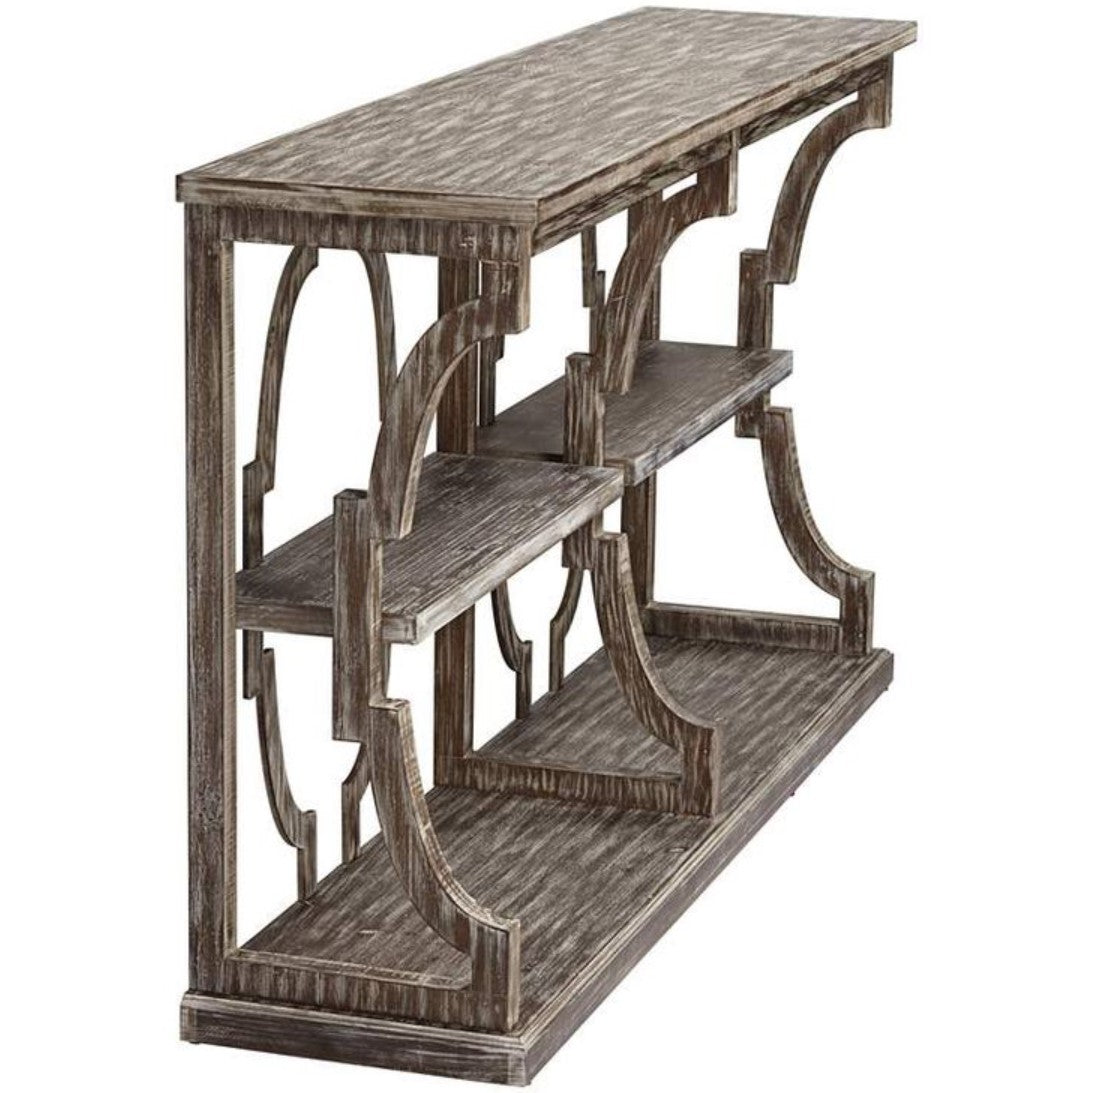 Crestview Collection Stockton 64" x 15" x 37" 3-Tier Traditional Wood Open Console In Chestnut Wash Finish